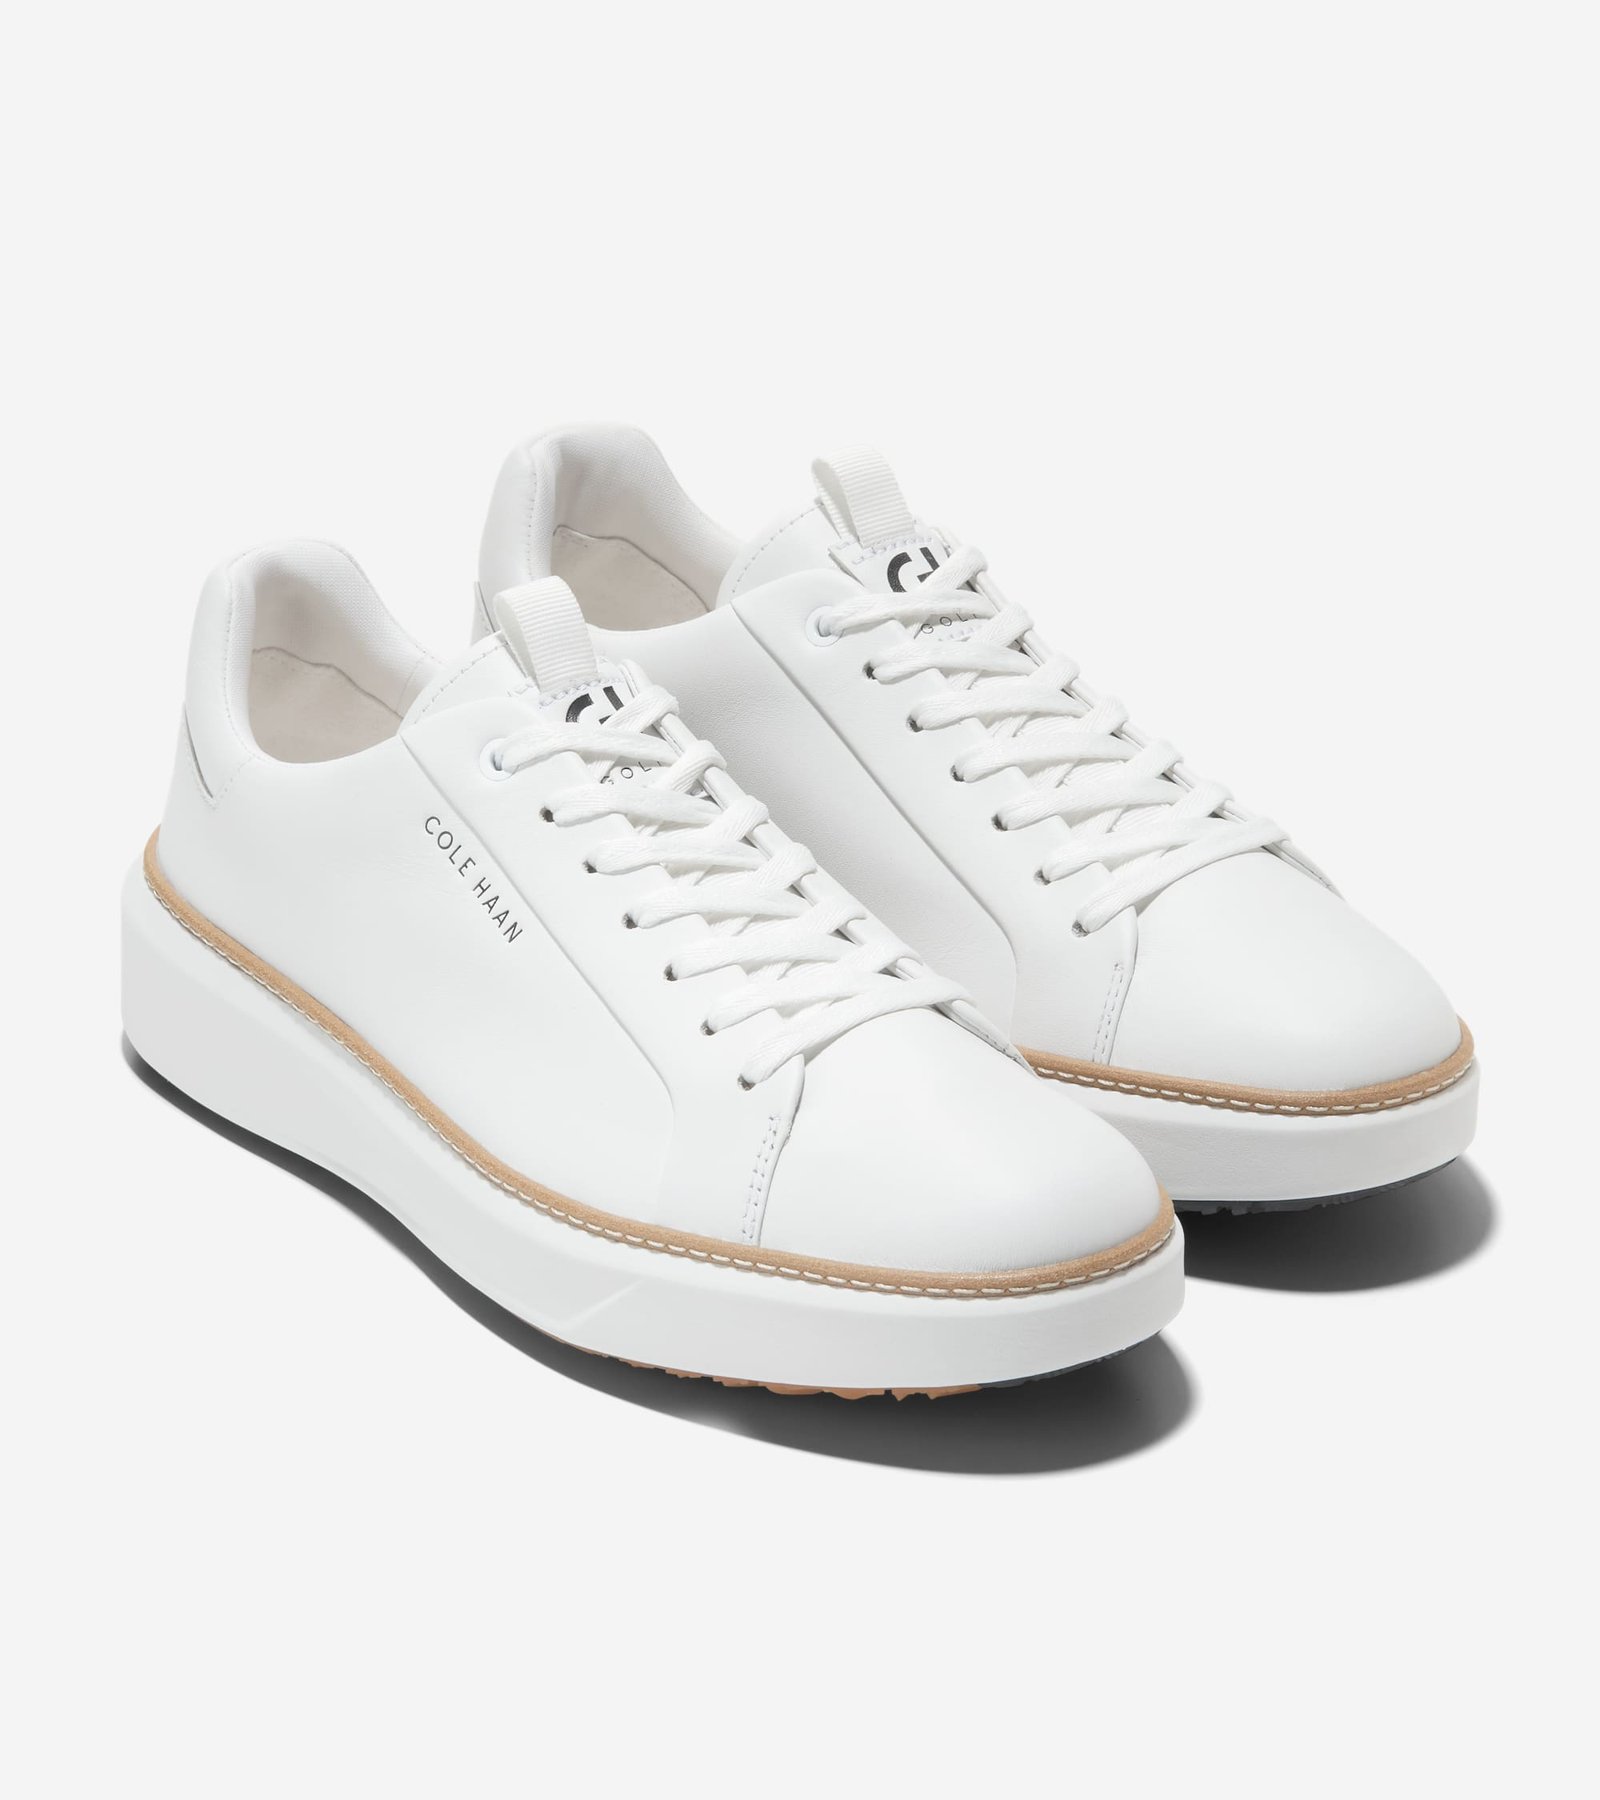 Cole Haan GrandPrø Topspin Golf Shoes